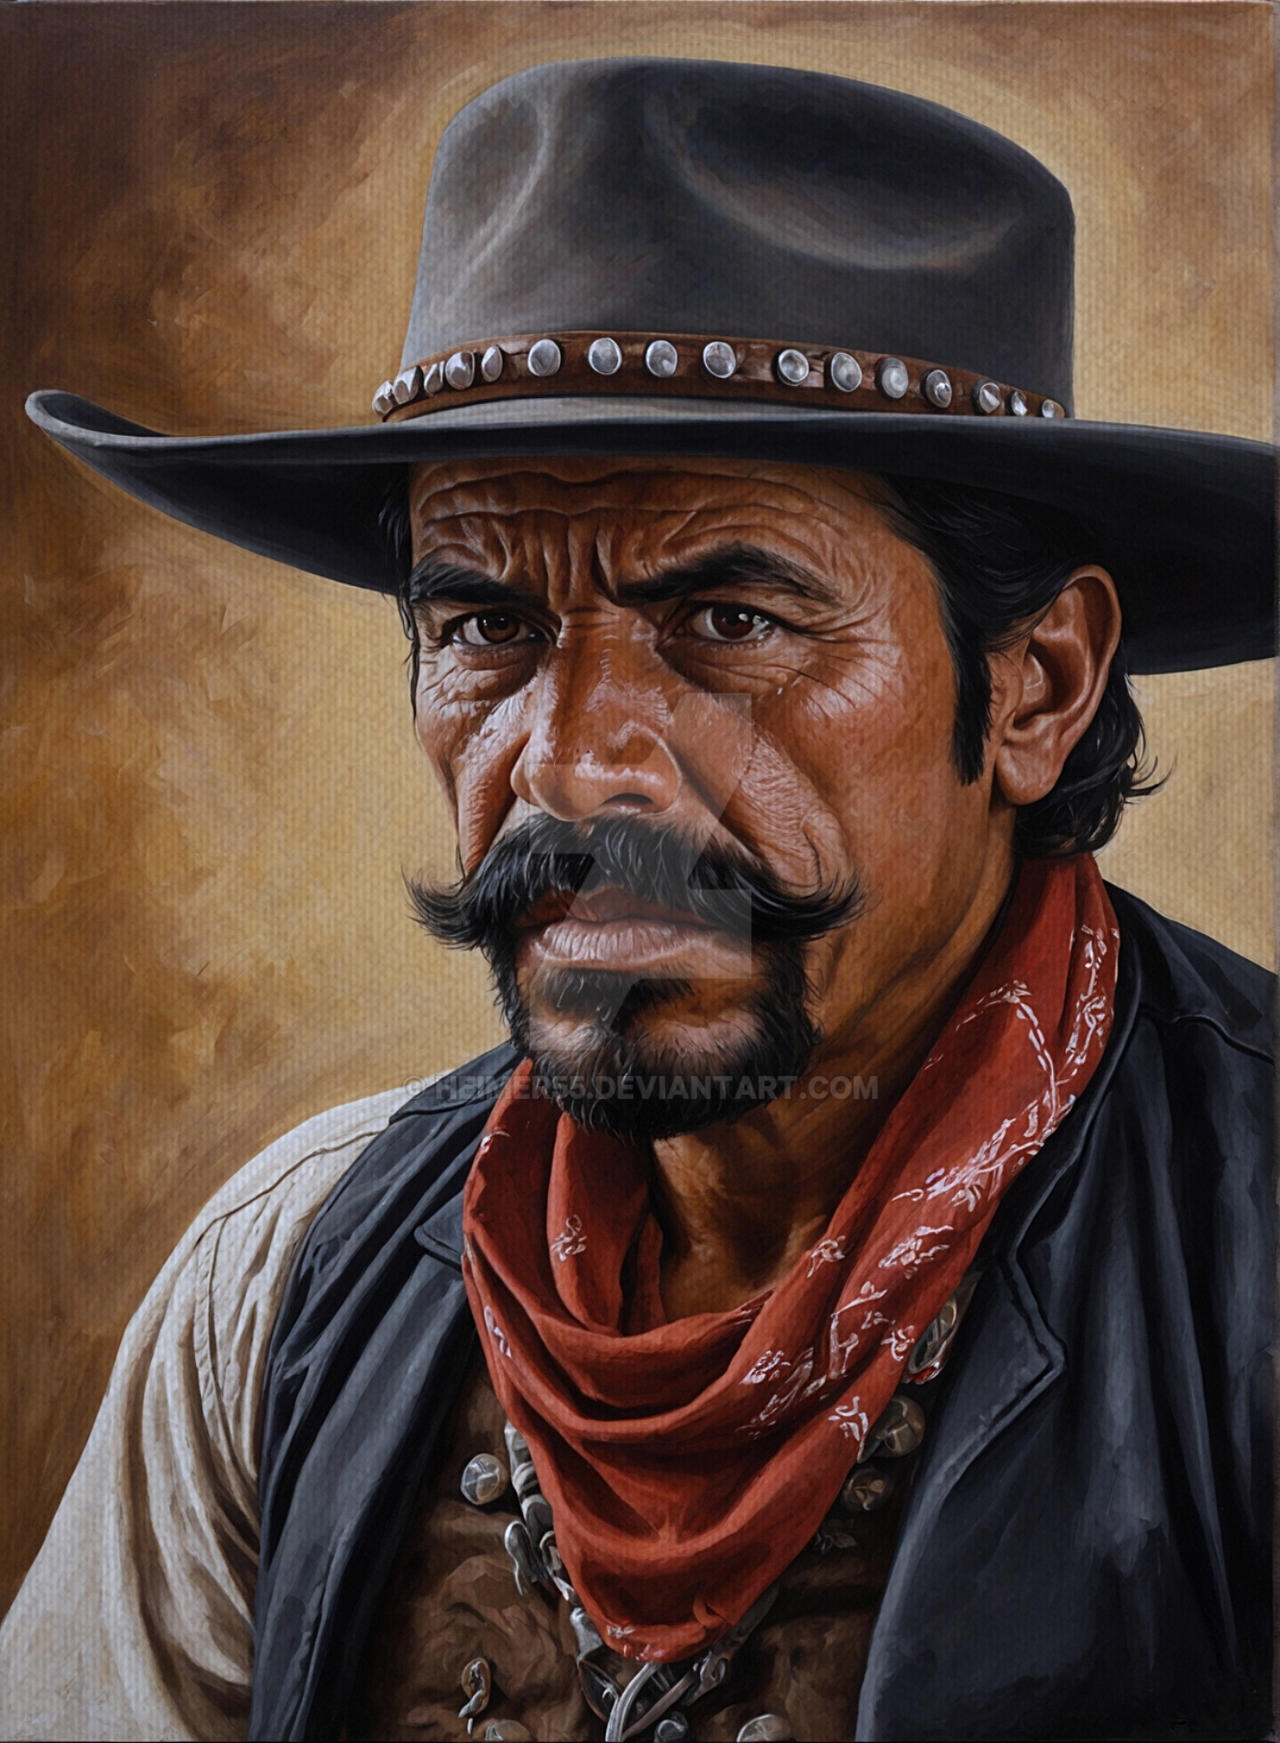 Painting of a western mexican bandito by Heimer55 on DeviantArt